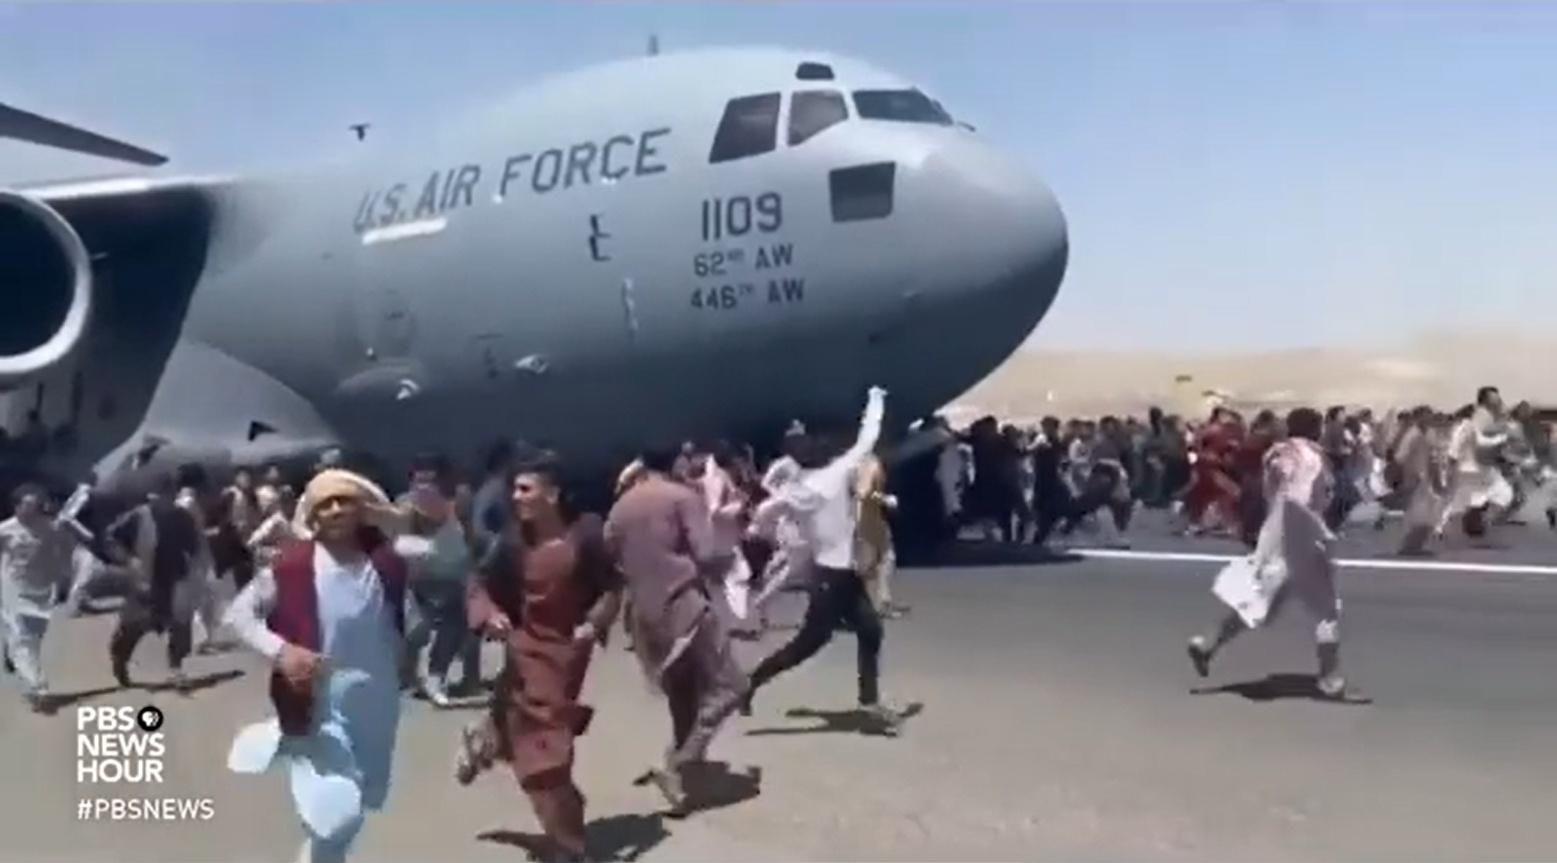 Hundreds of Afghans race after a U.S. Air Force plane leaving the airport in Kabul, Afghanistan. Seven people died in the chaos.